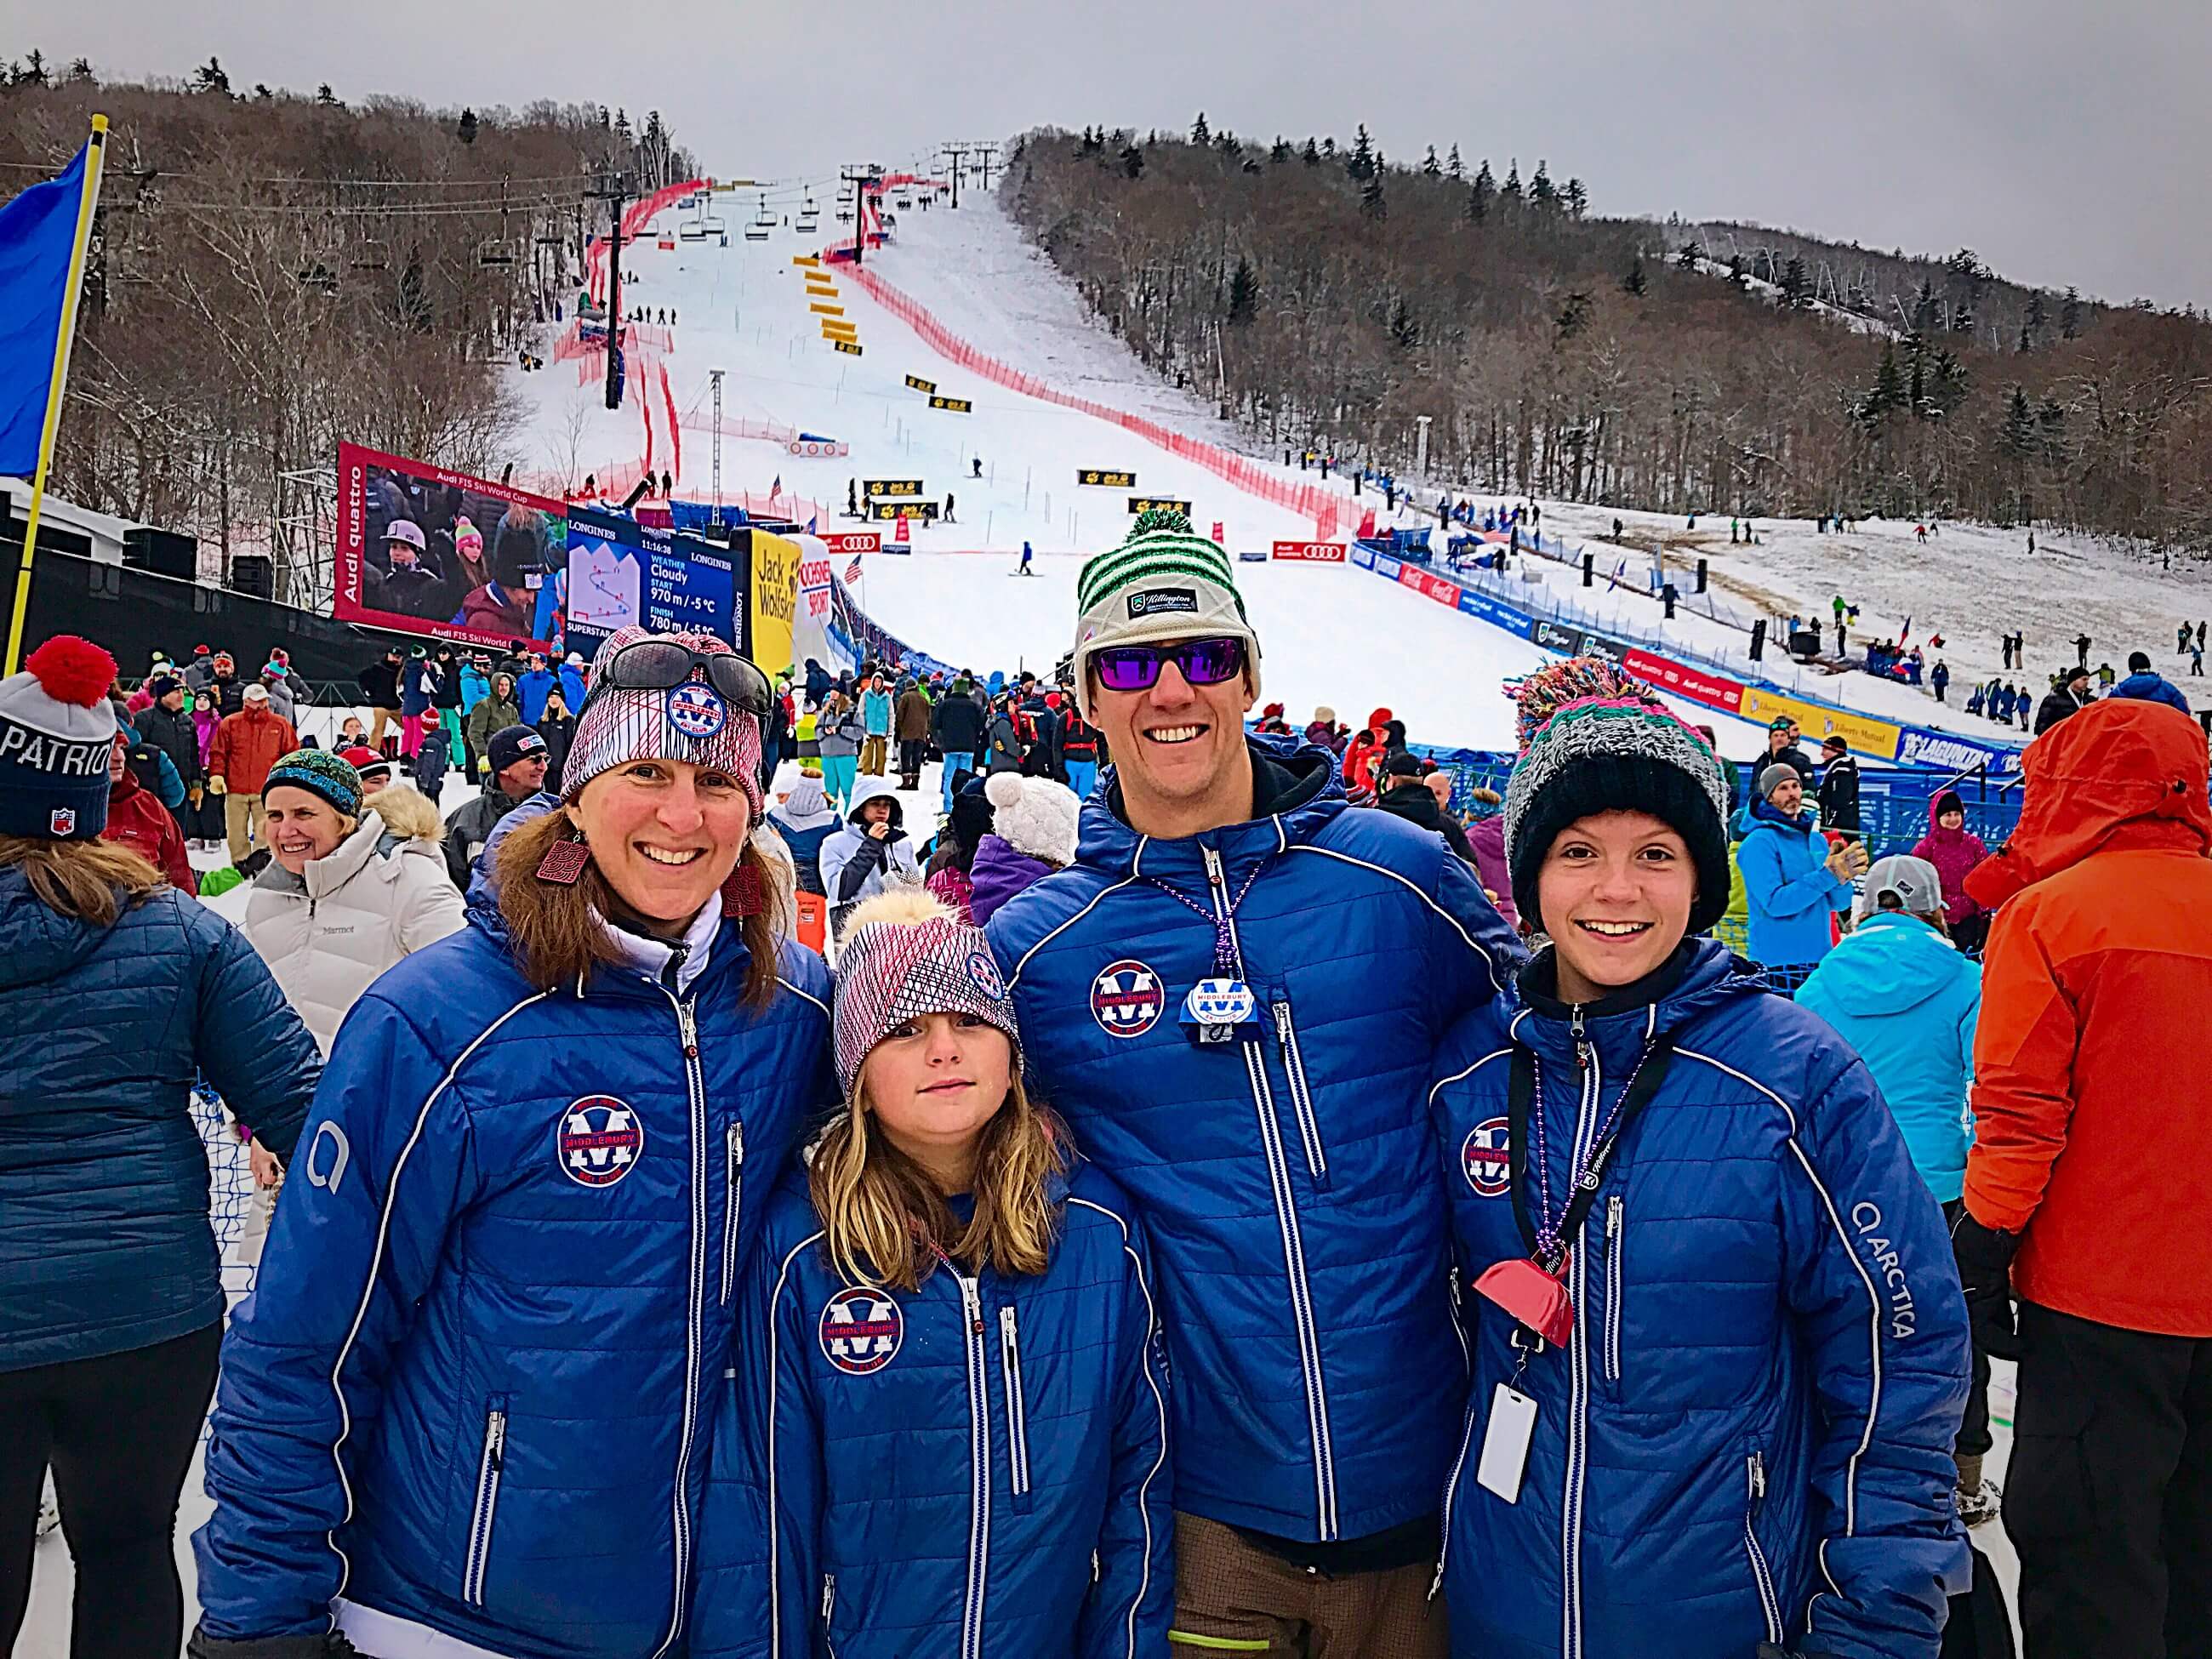 Ski racing dad from Middlebury, VT wearing their Arctica team jackets at a World Cup ski race.